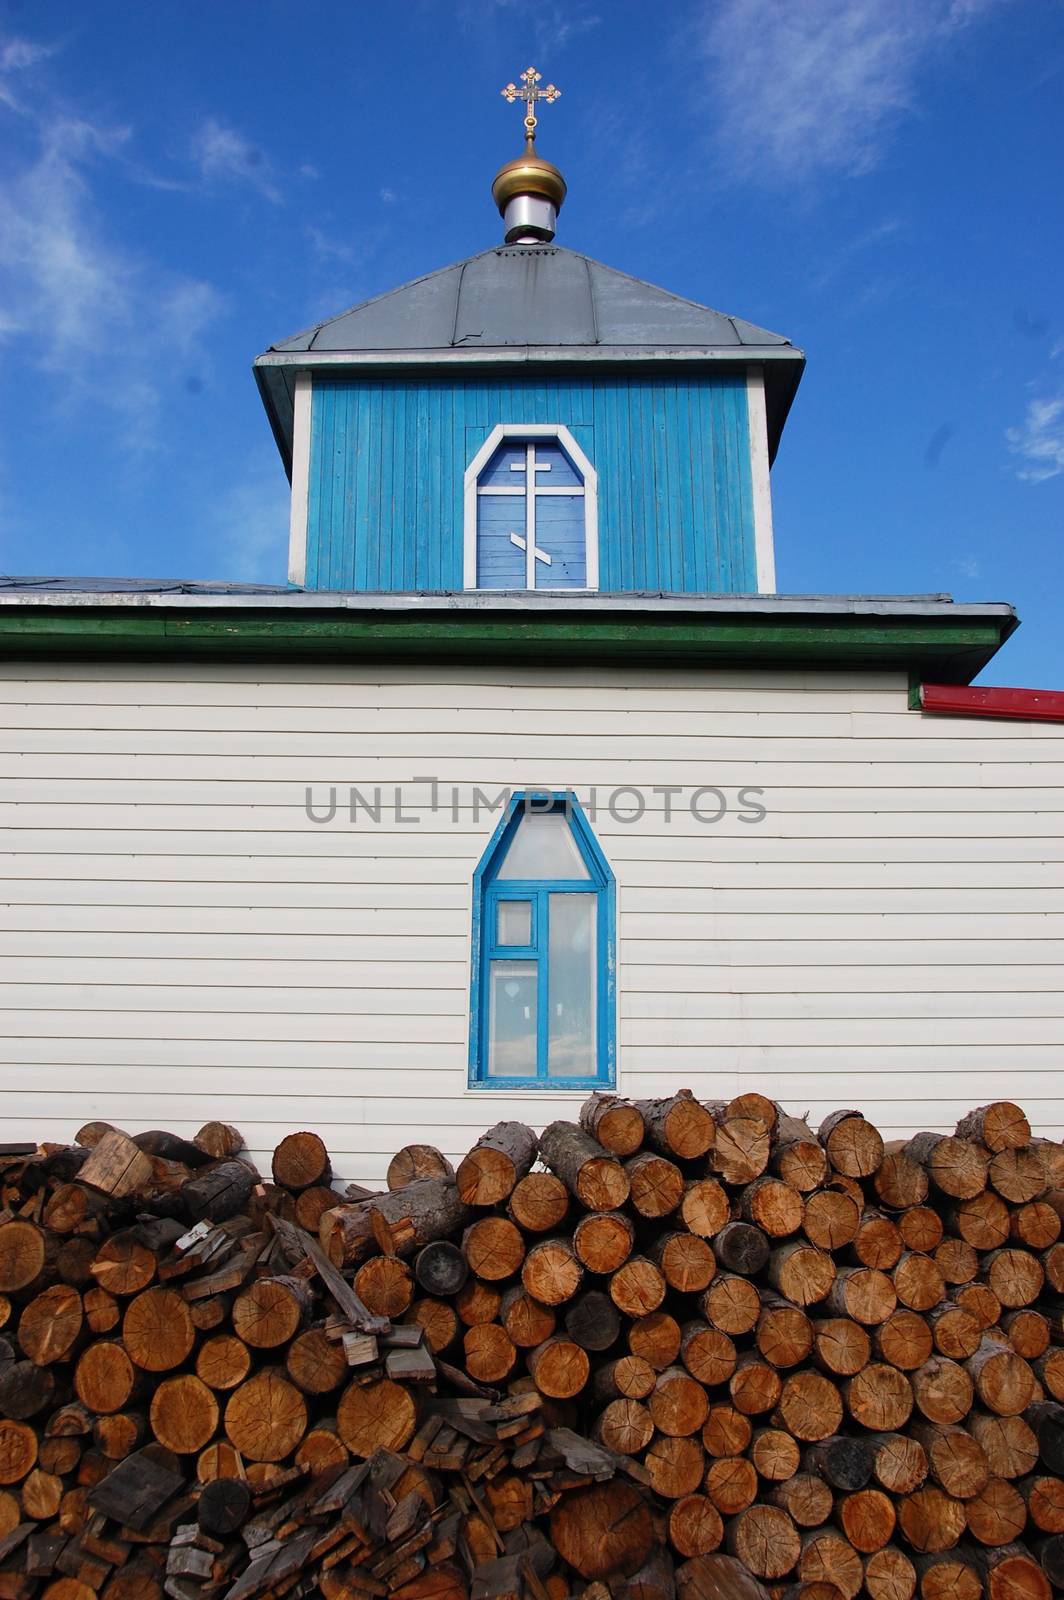 Woodpile at christian church building by danemo